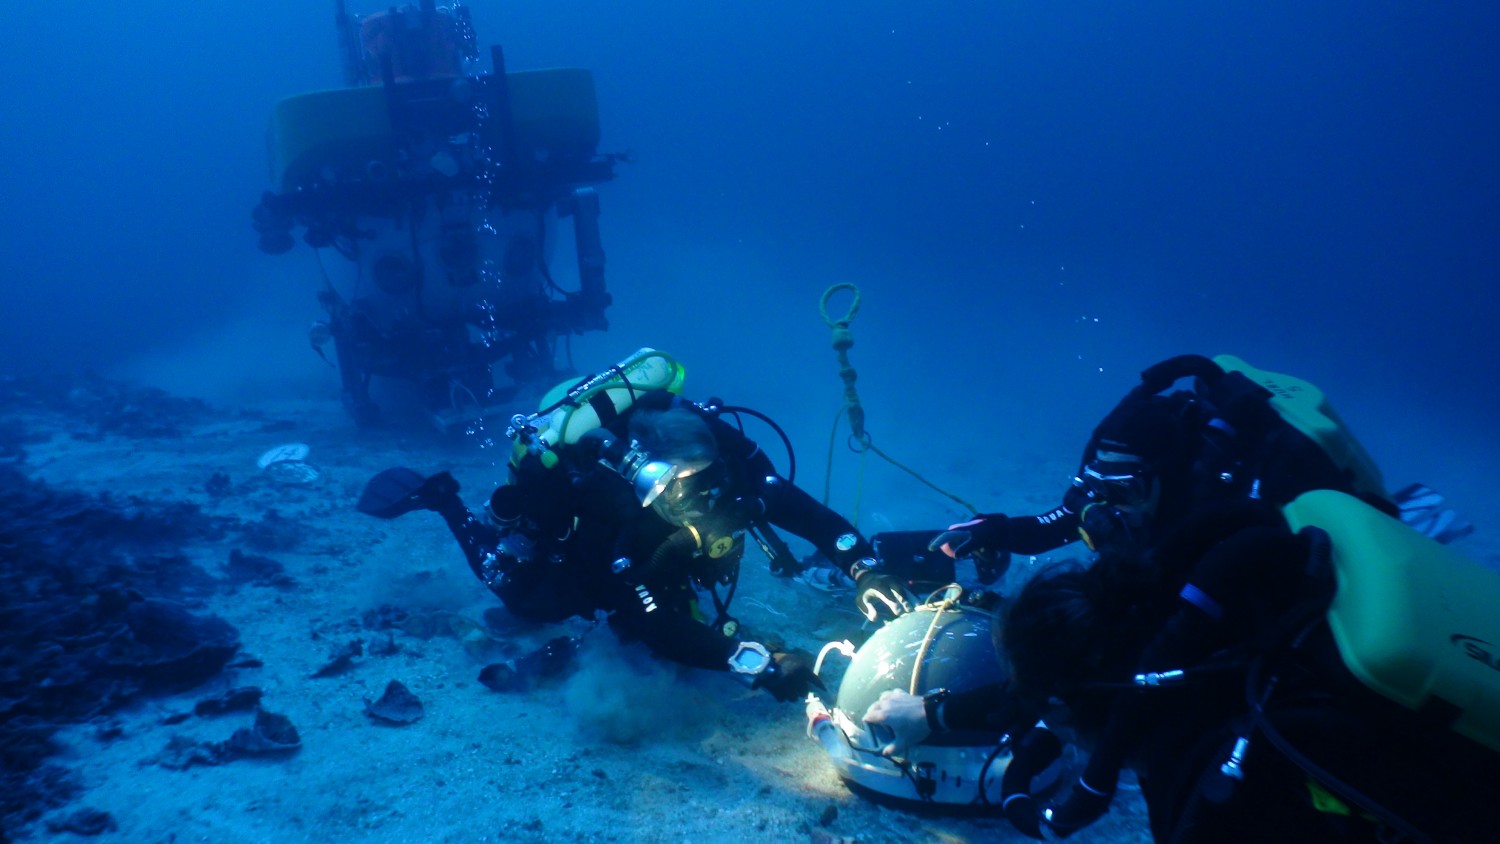 Divers sealing chamber witih Pisces IV in background